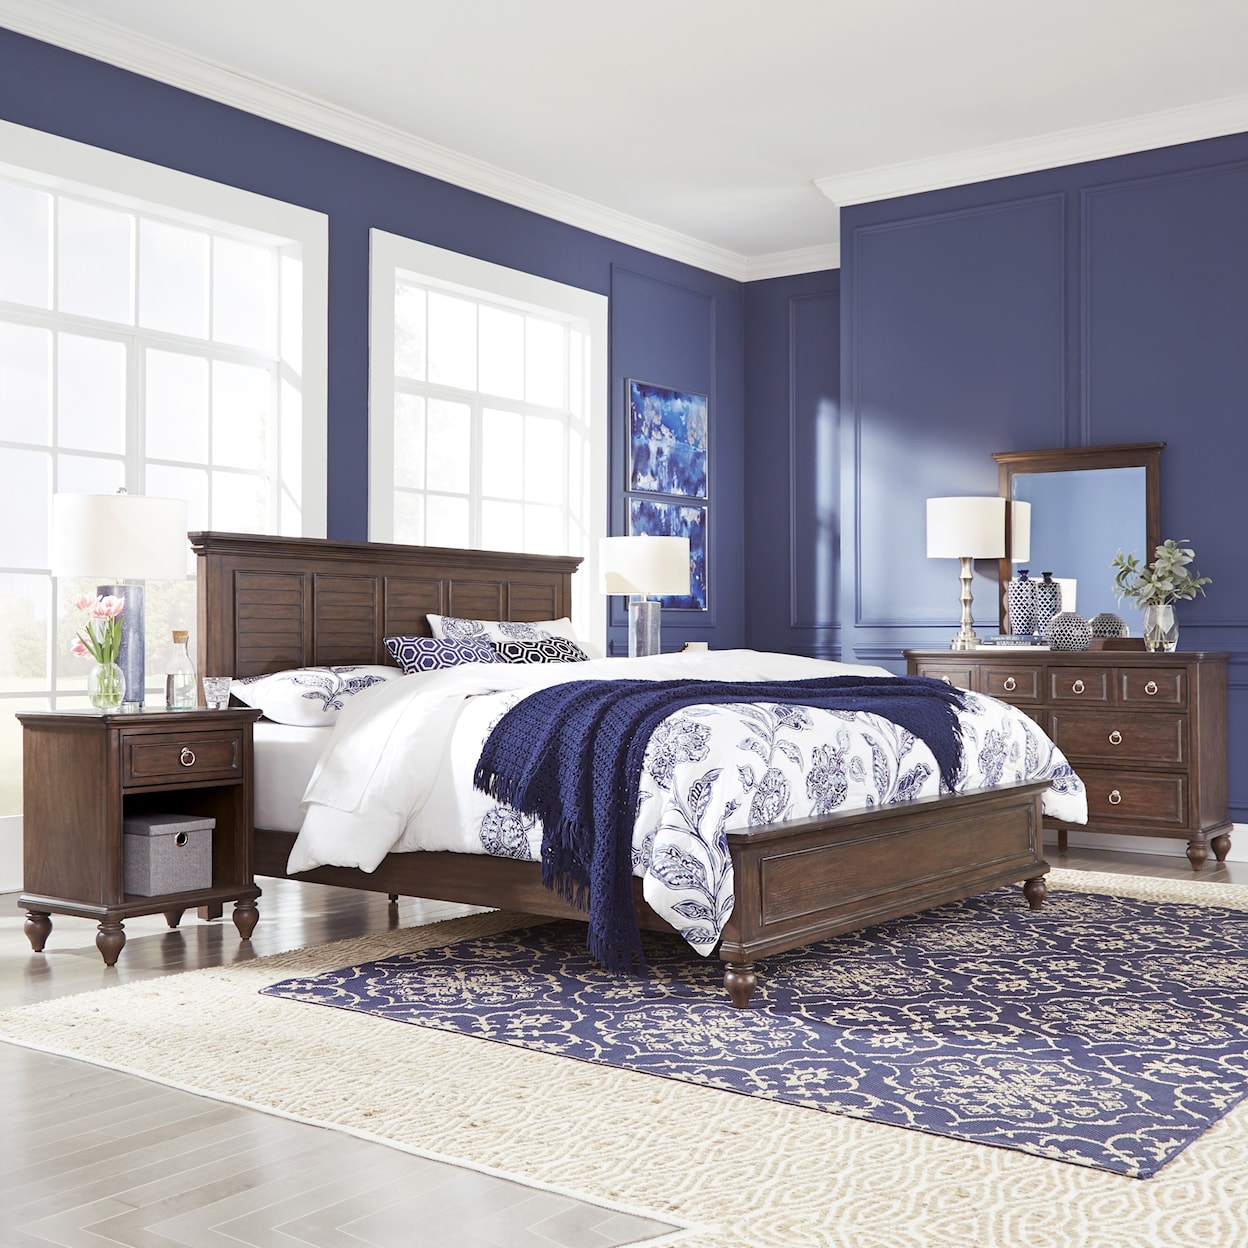 homestyles Southport King Bedroom Group